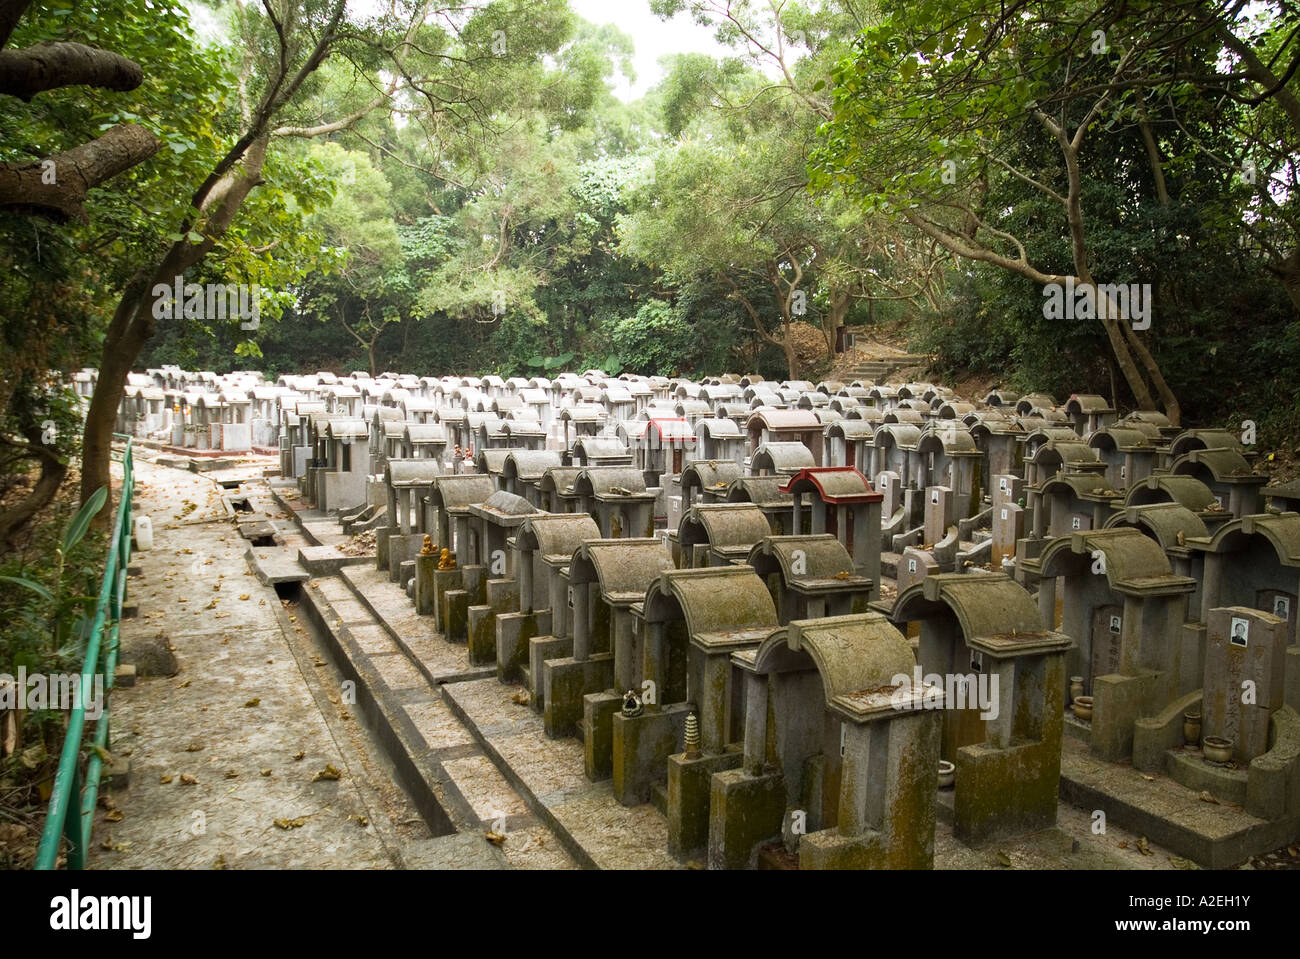 dh Chinese graveyard CHEUNG CHAU HONG KONG Rows of gravestones in woodland cemetery tombstone Stock Photo